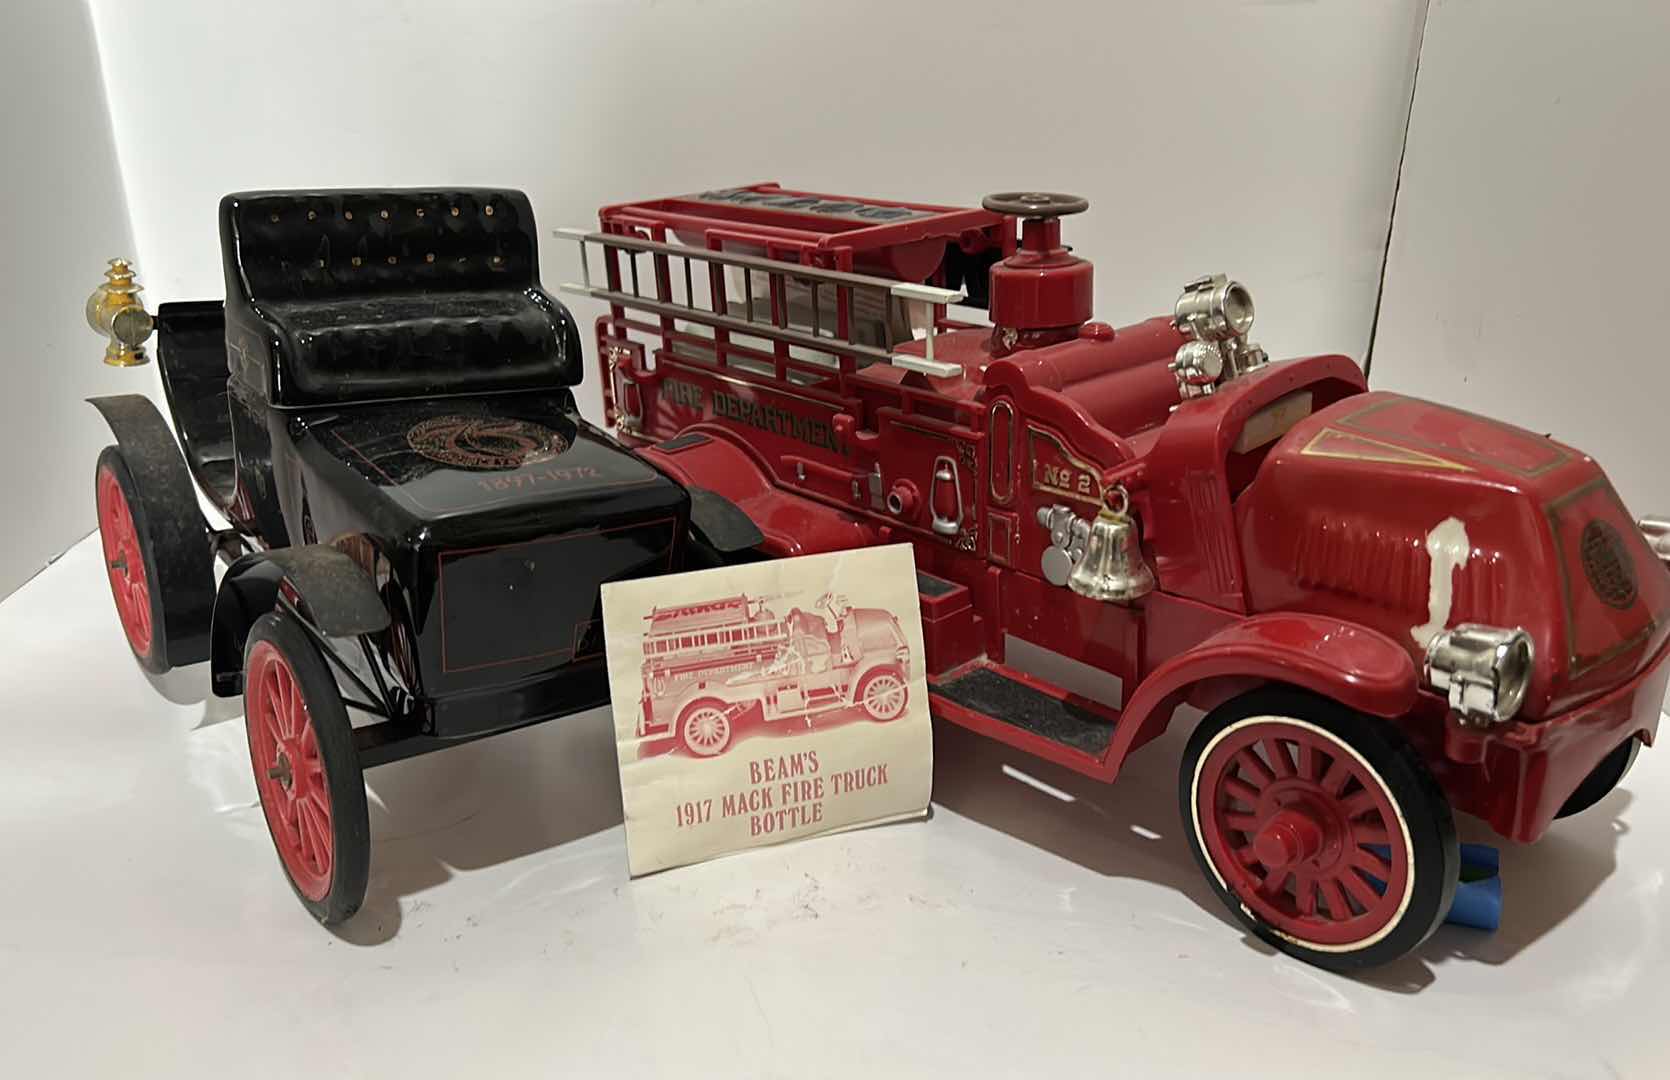 Photo 1 of COLLECTIBLE LIQUOR BOTTLES FIRE TRUCK MEASURES 17“ x 6 1/2“ x 7“